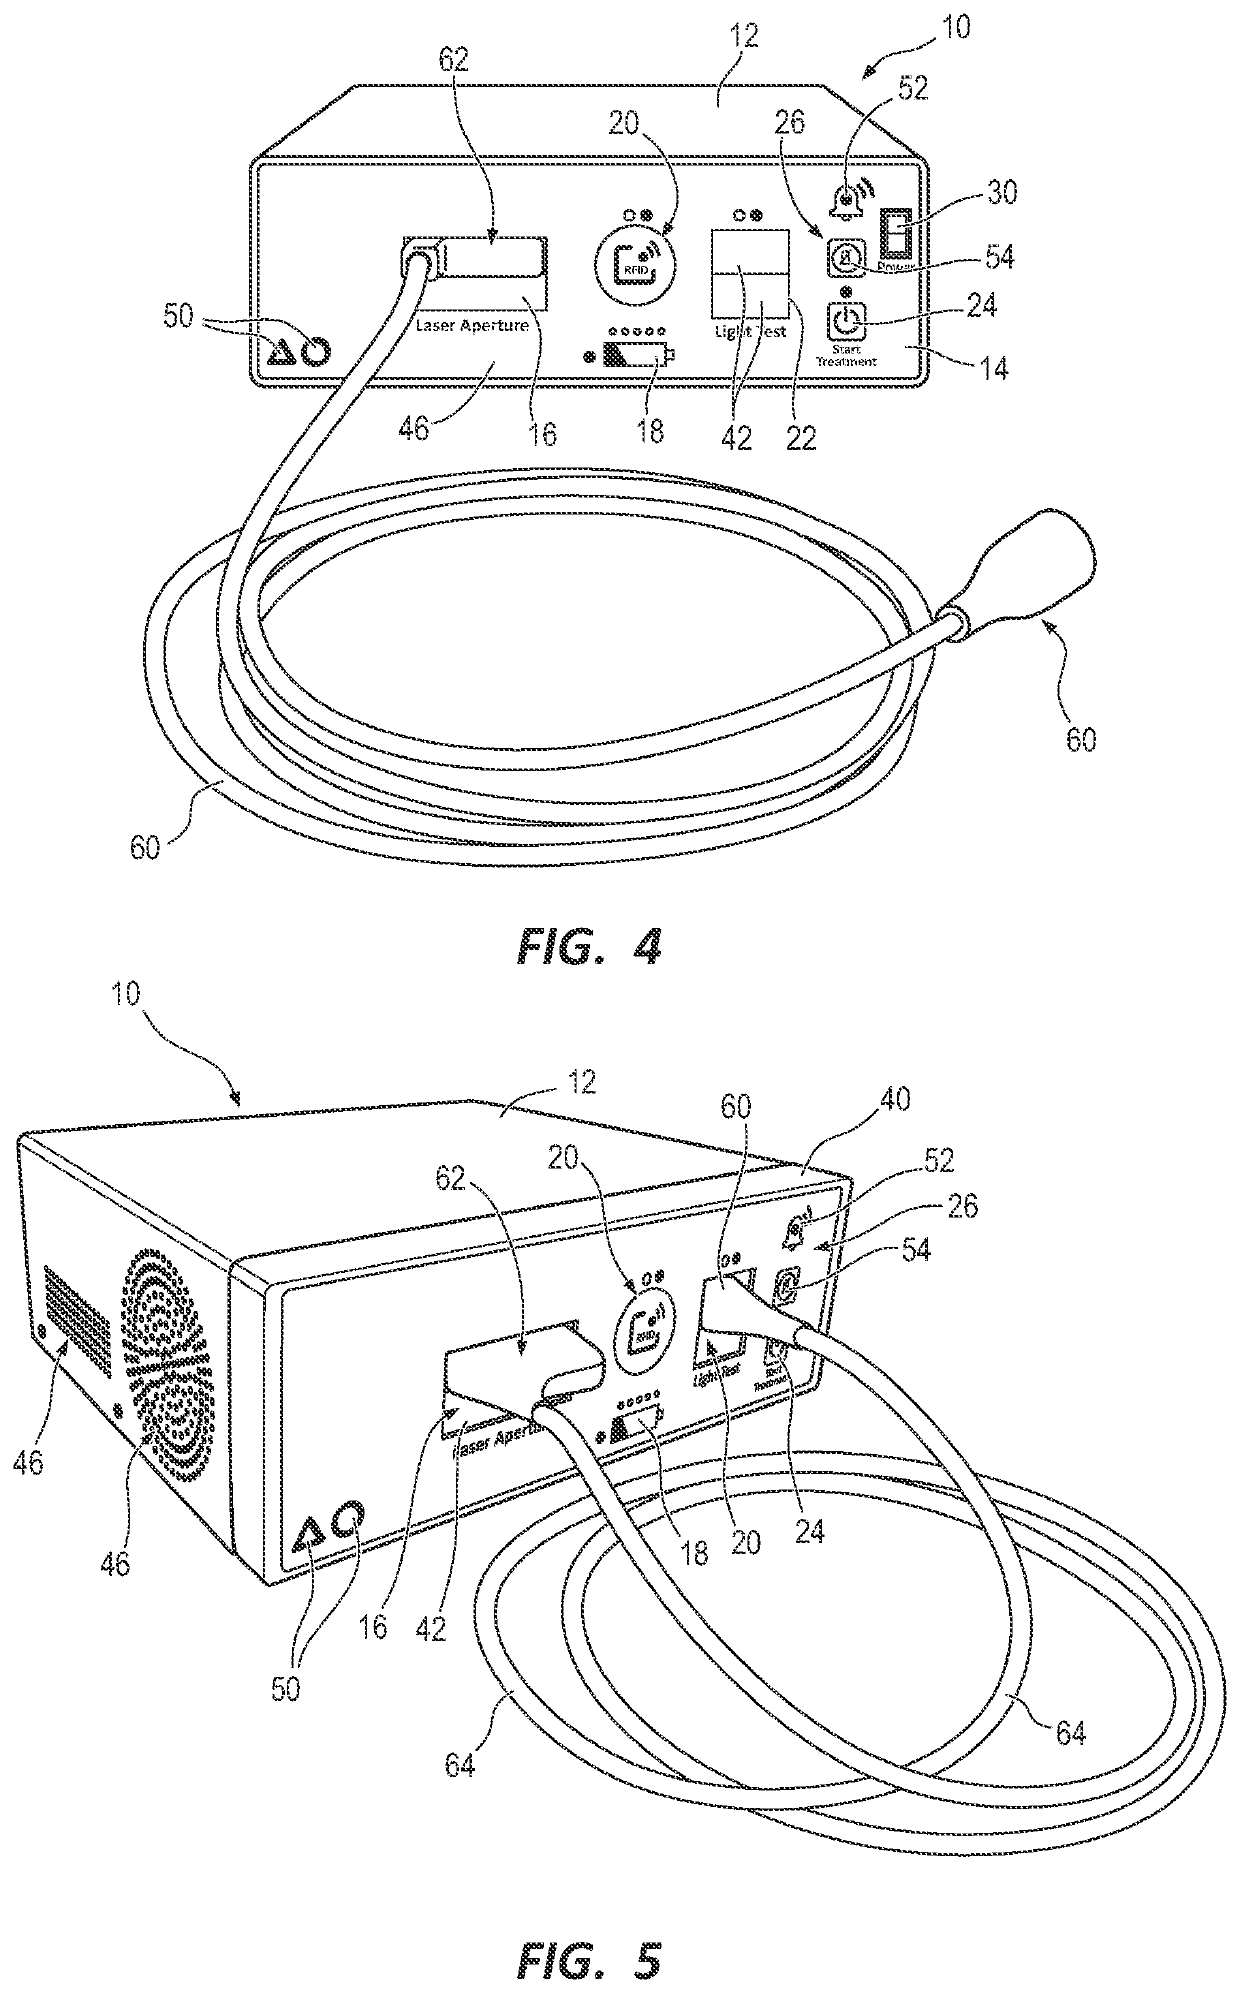 Electromagnetic radiation delivery and monitoring system and methods for preventing, reducing and/or eliminating catheter-related infections during institutional or in-home use